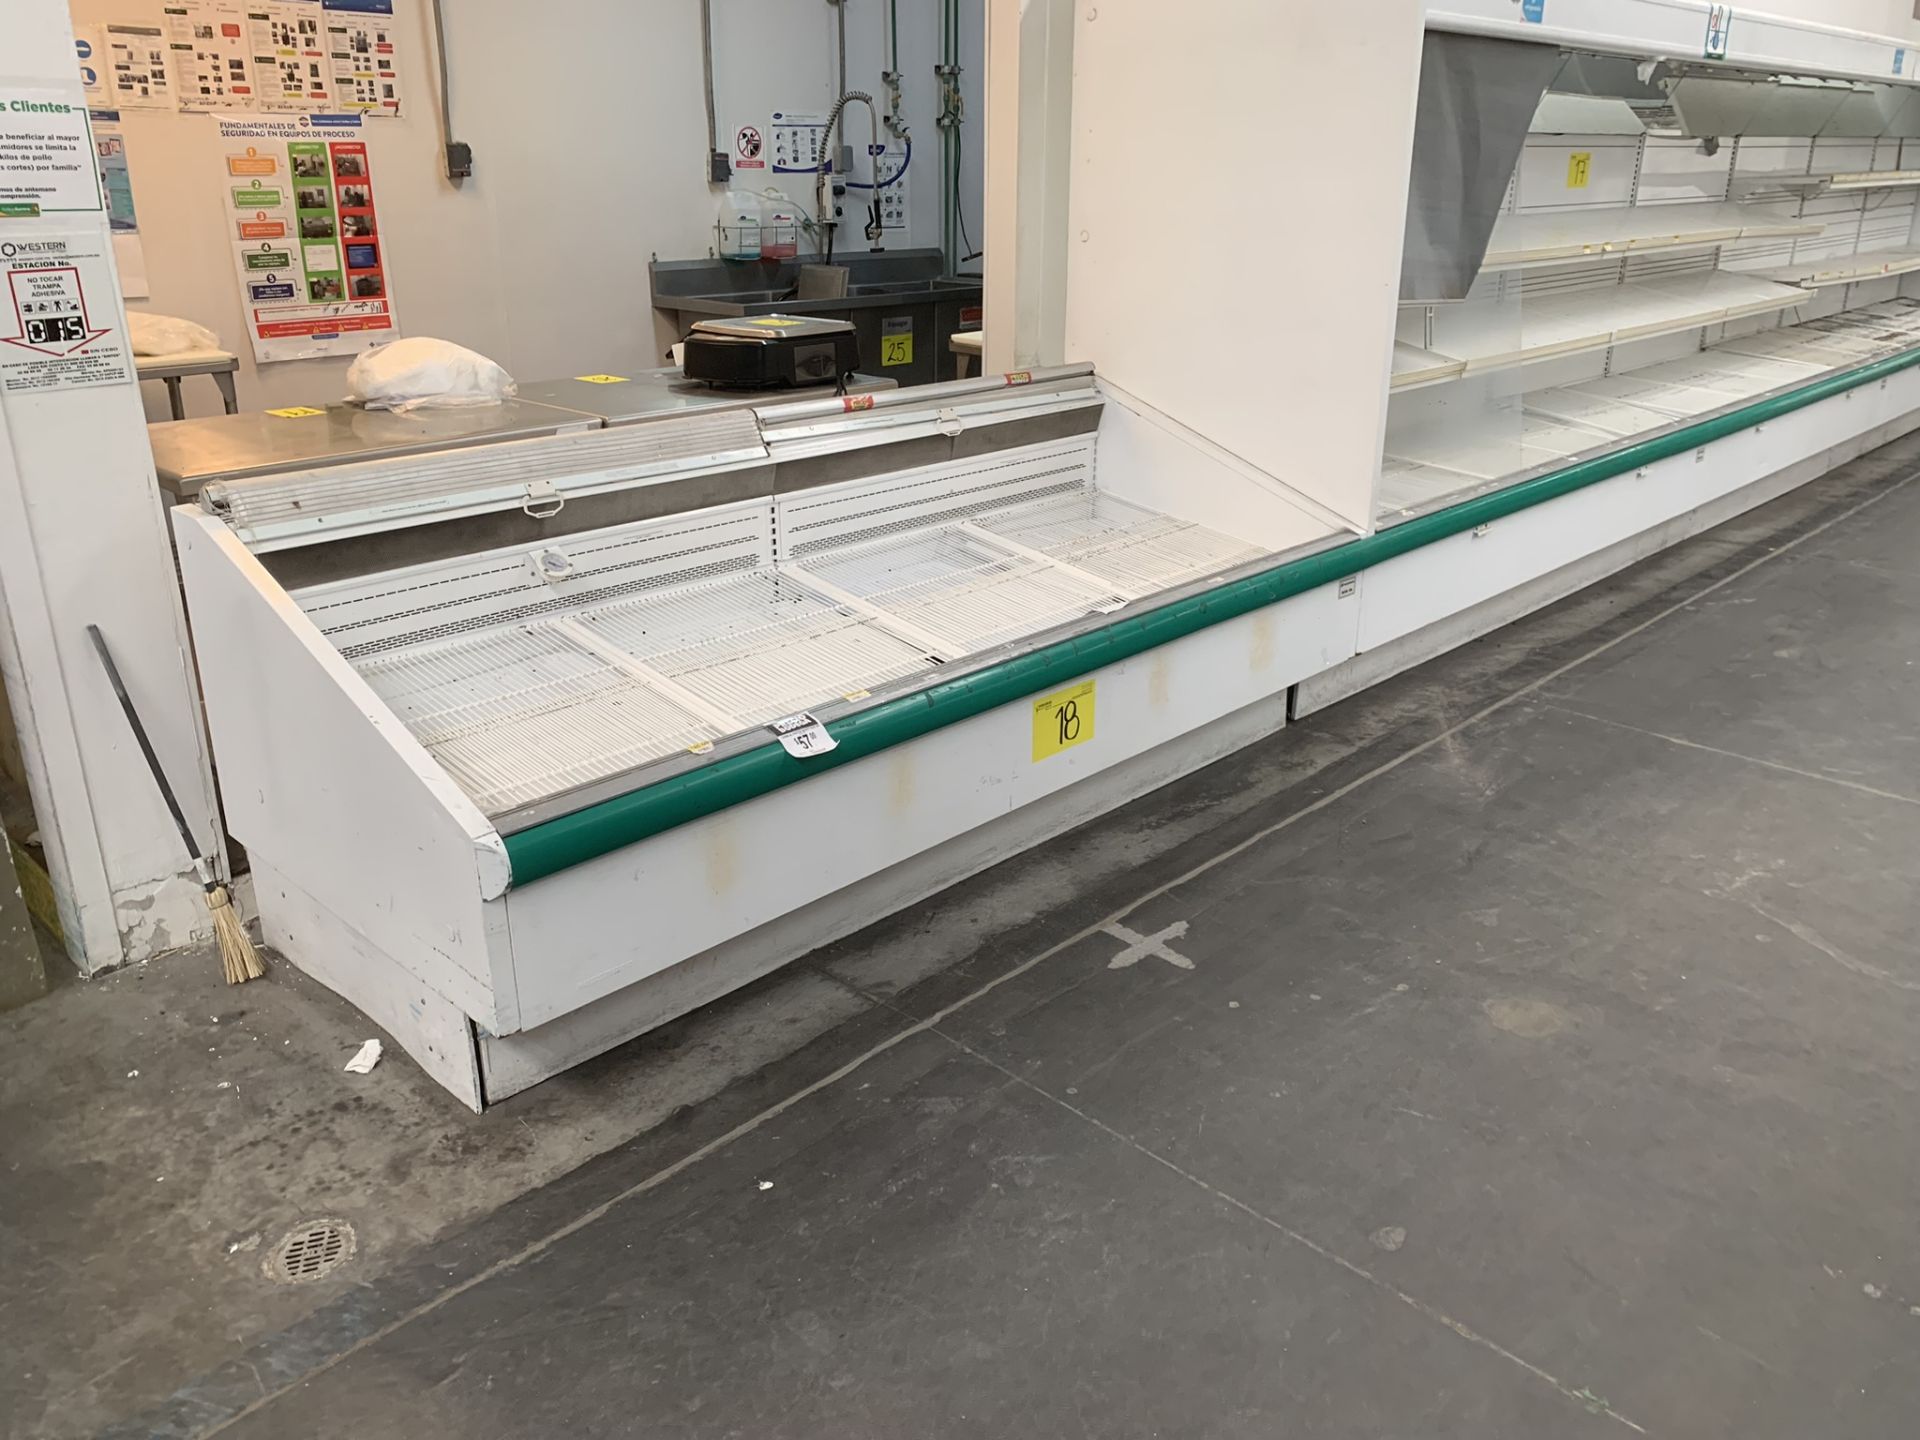 Hussmann bunker-type refrigerated display case for meats measures 2.55 x 1.10 x 0.90 mts - Image 5 of 8